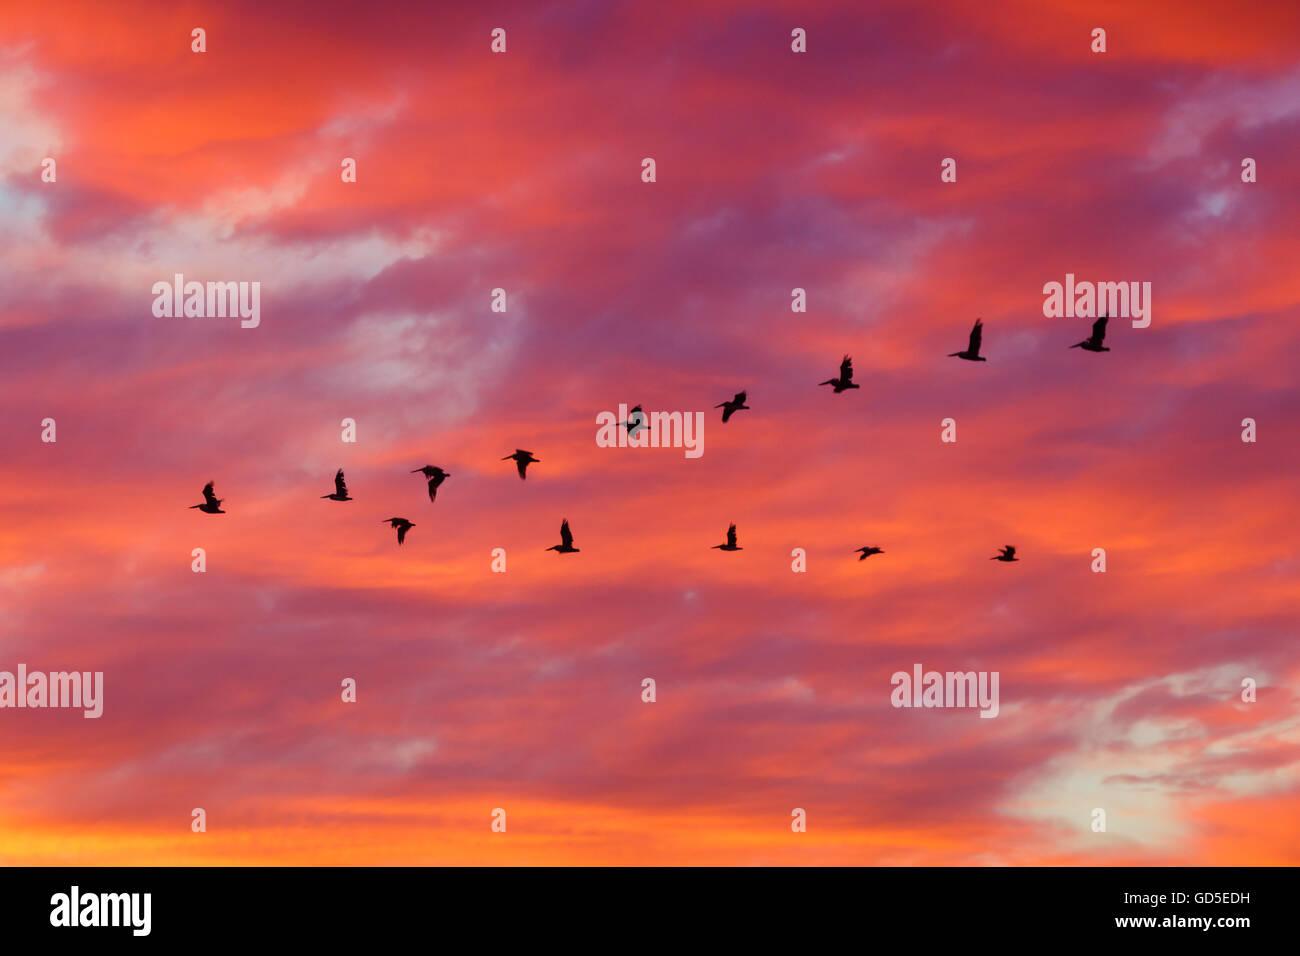 Sillhoutte of birds flying in formation with dramatic clouds at sunset Stock Photo